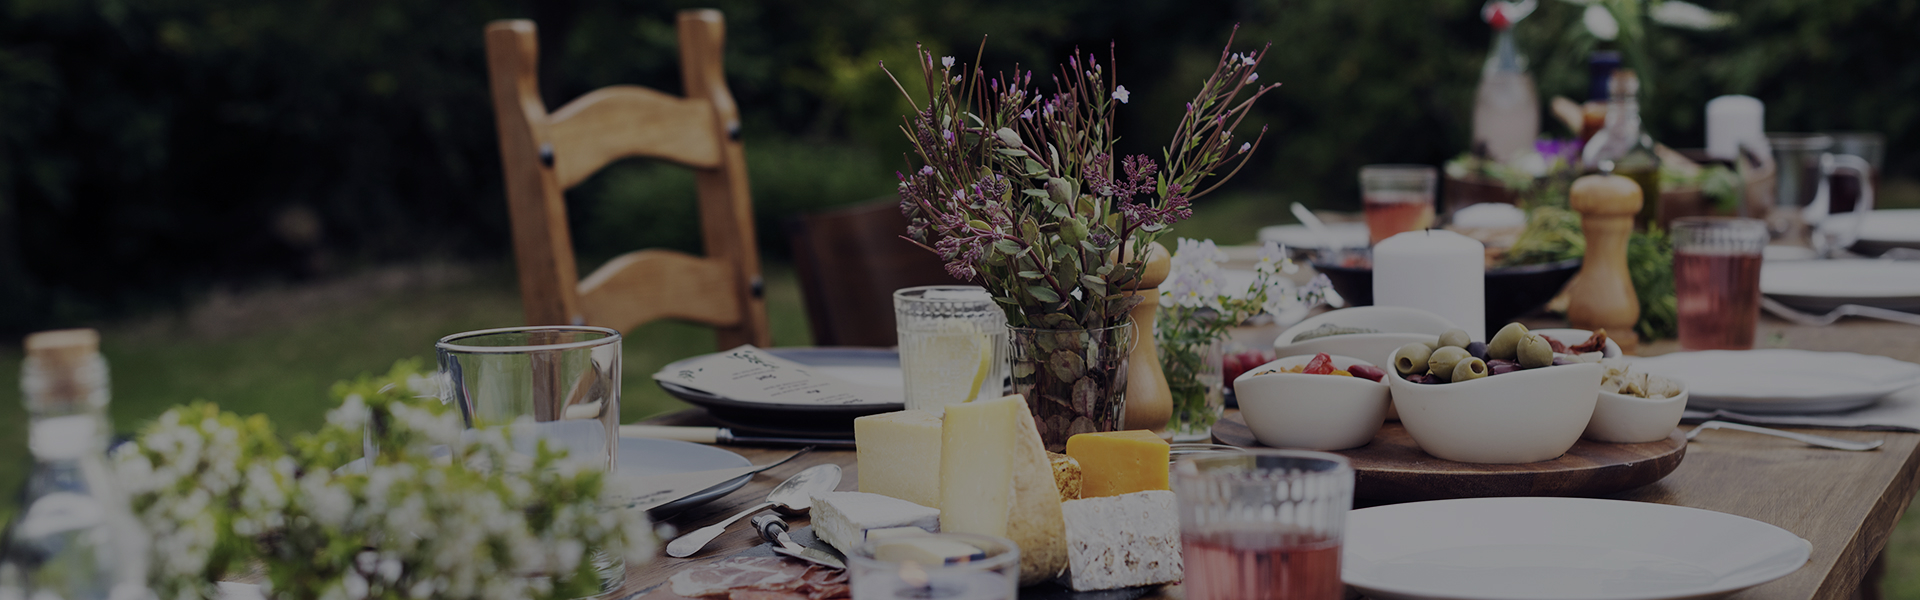 Hosting the Perfect Summer Party with Beko: Tips for a Healthy Lifestyle